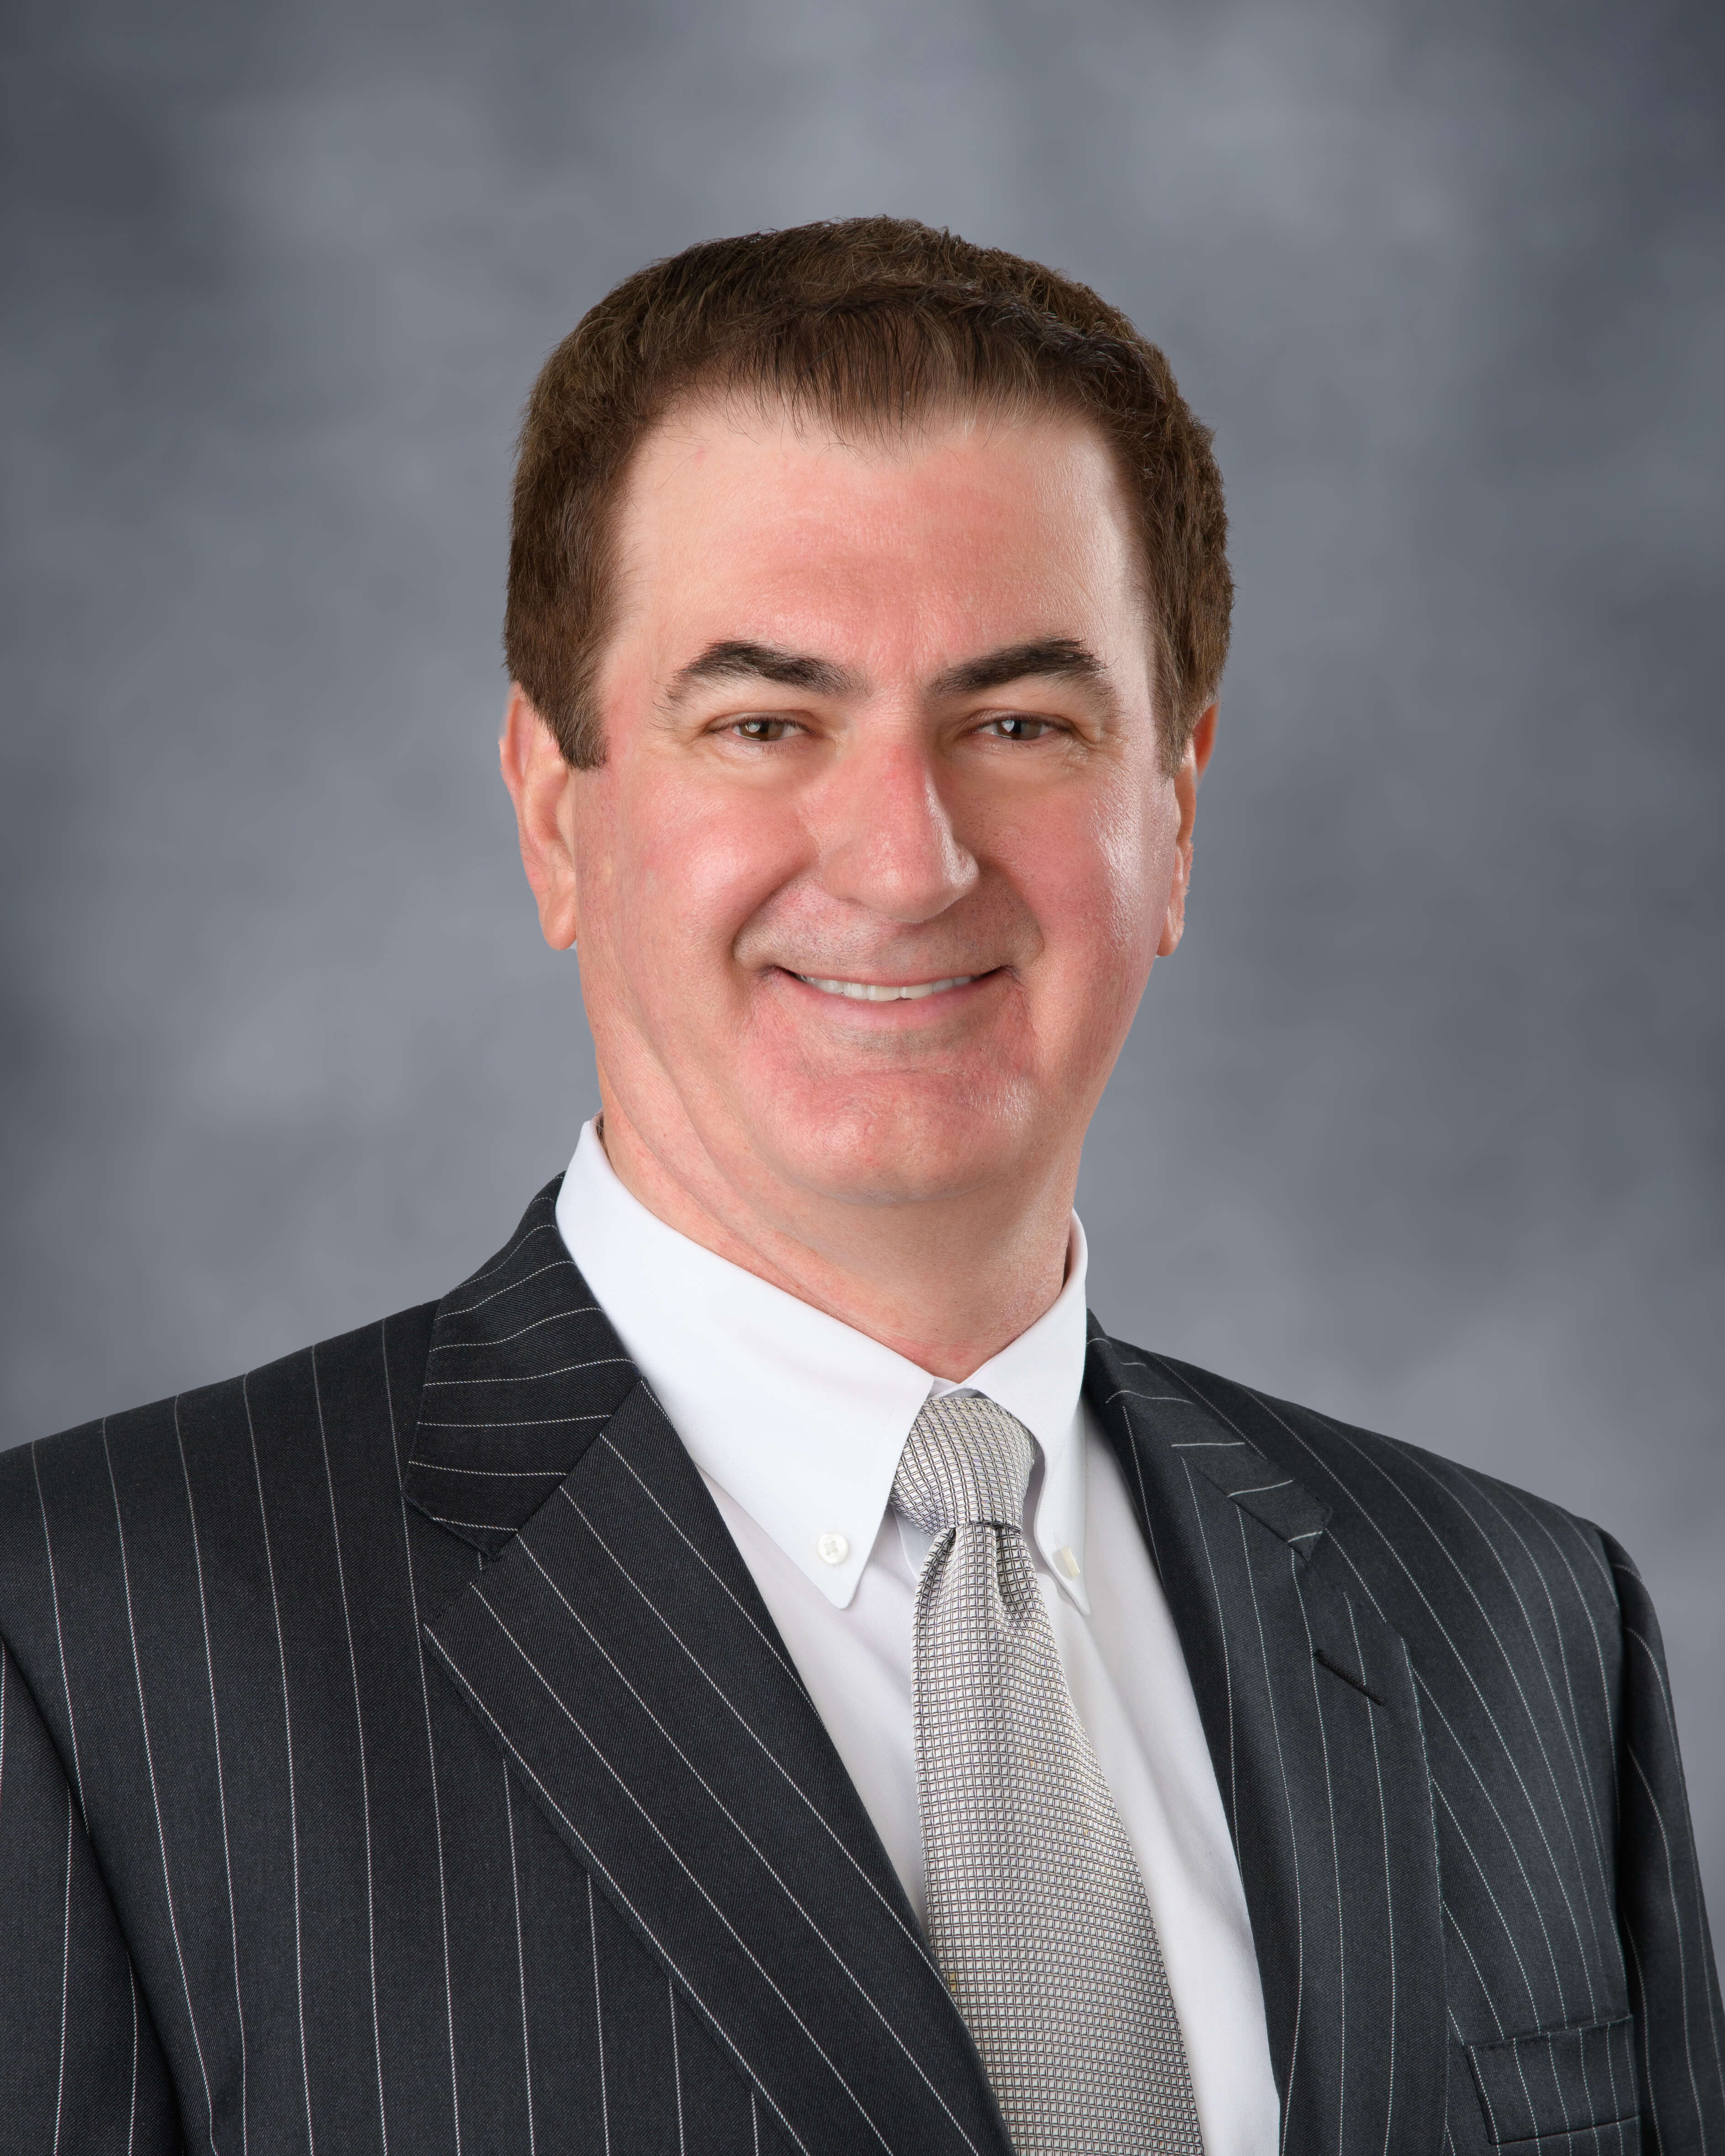 Jack Brkich III certified financial planner and president of JMB Financial Managers Irvine, California